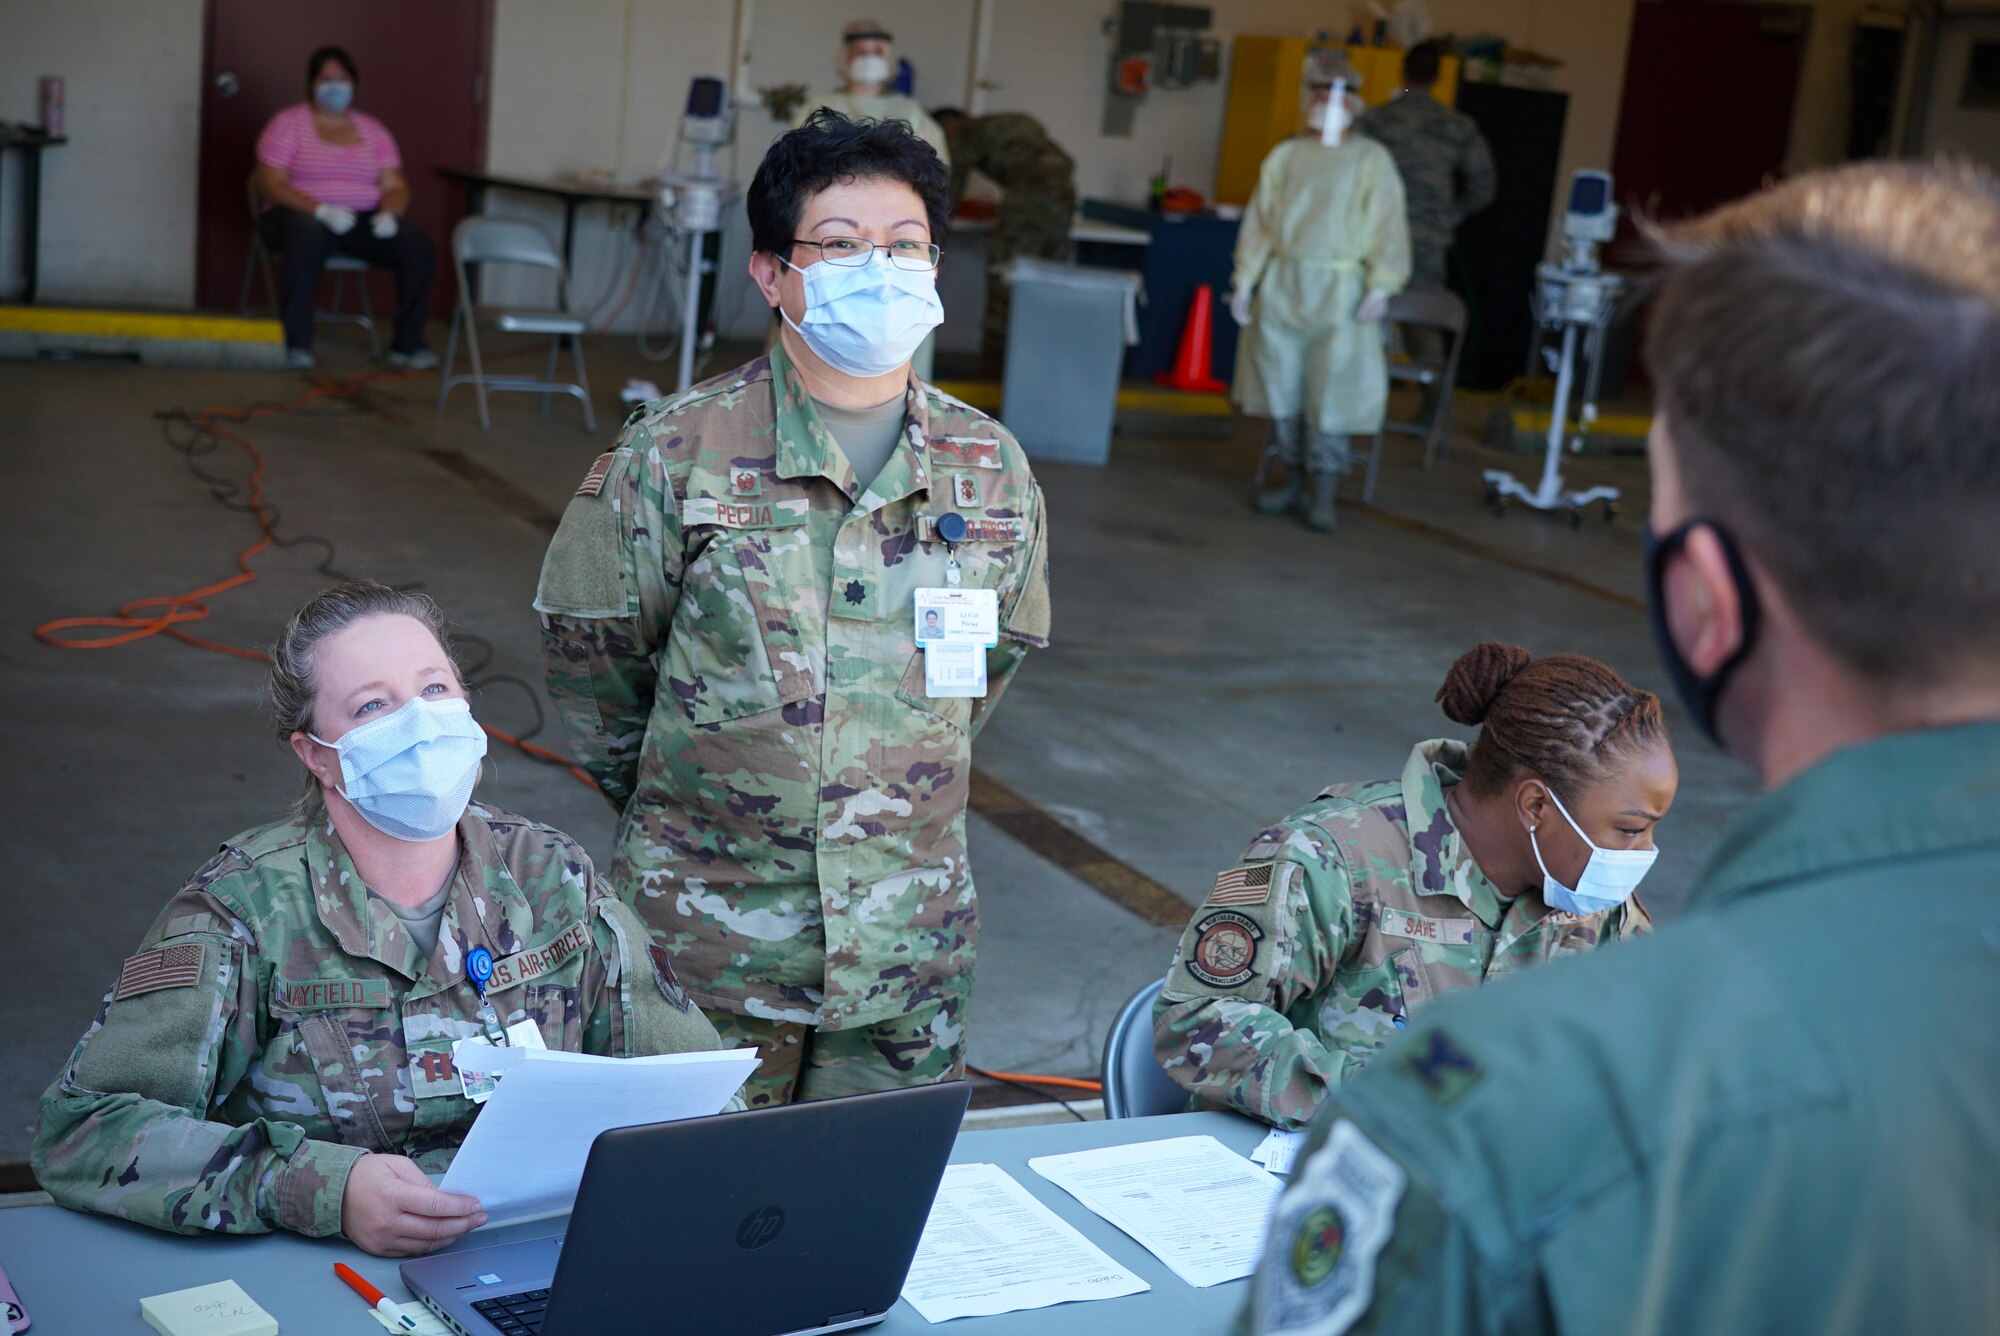 Two women in military uniform and face masks look at a patient as he checks in for an appointment.